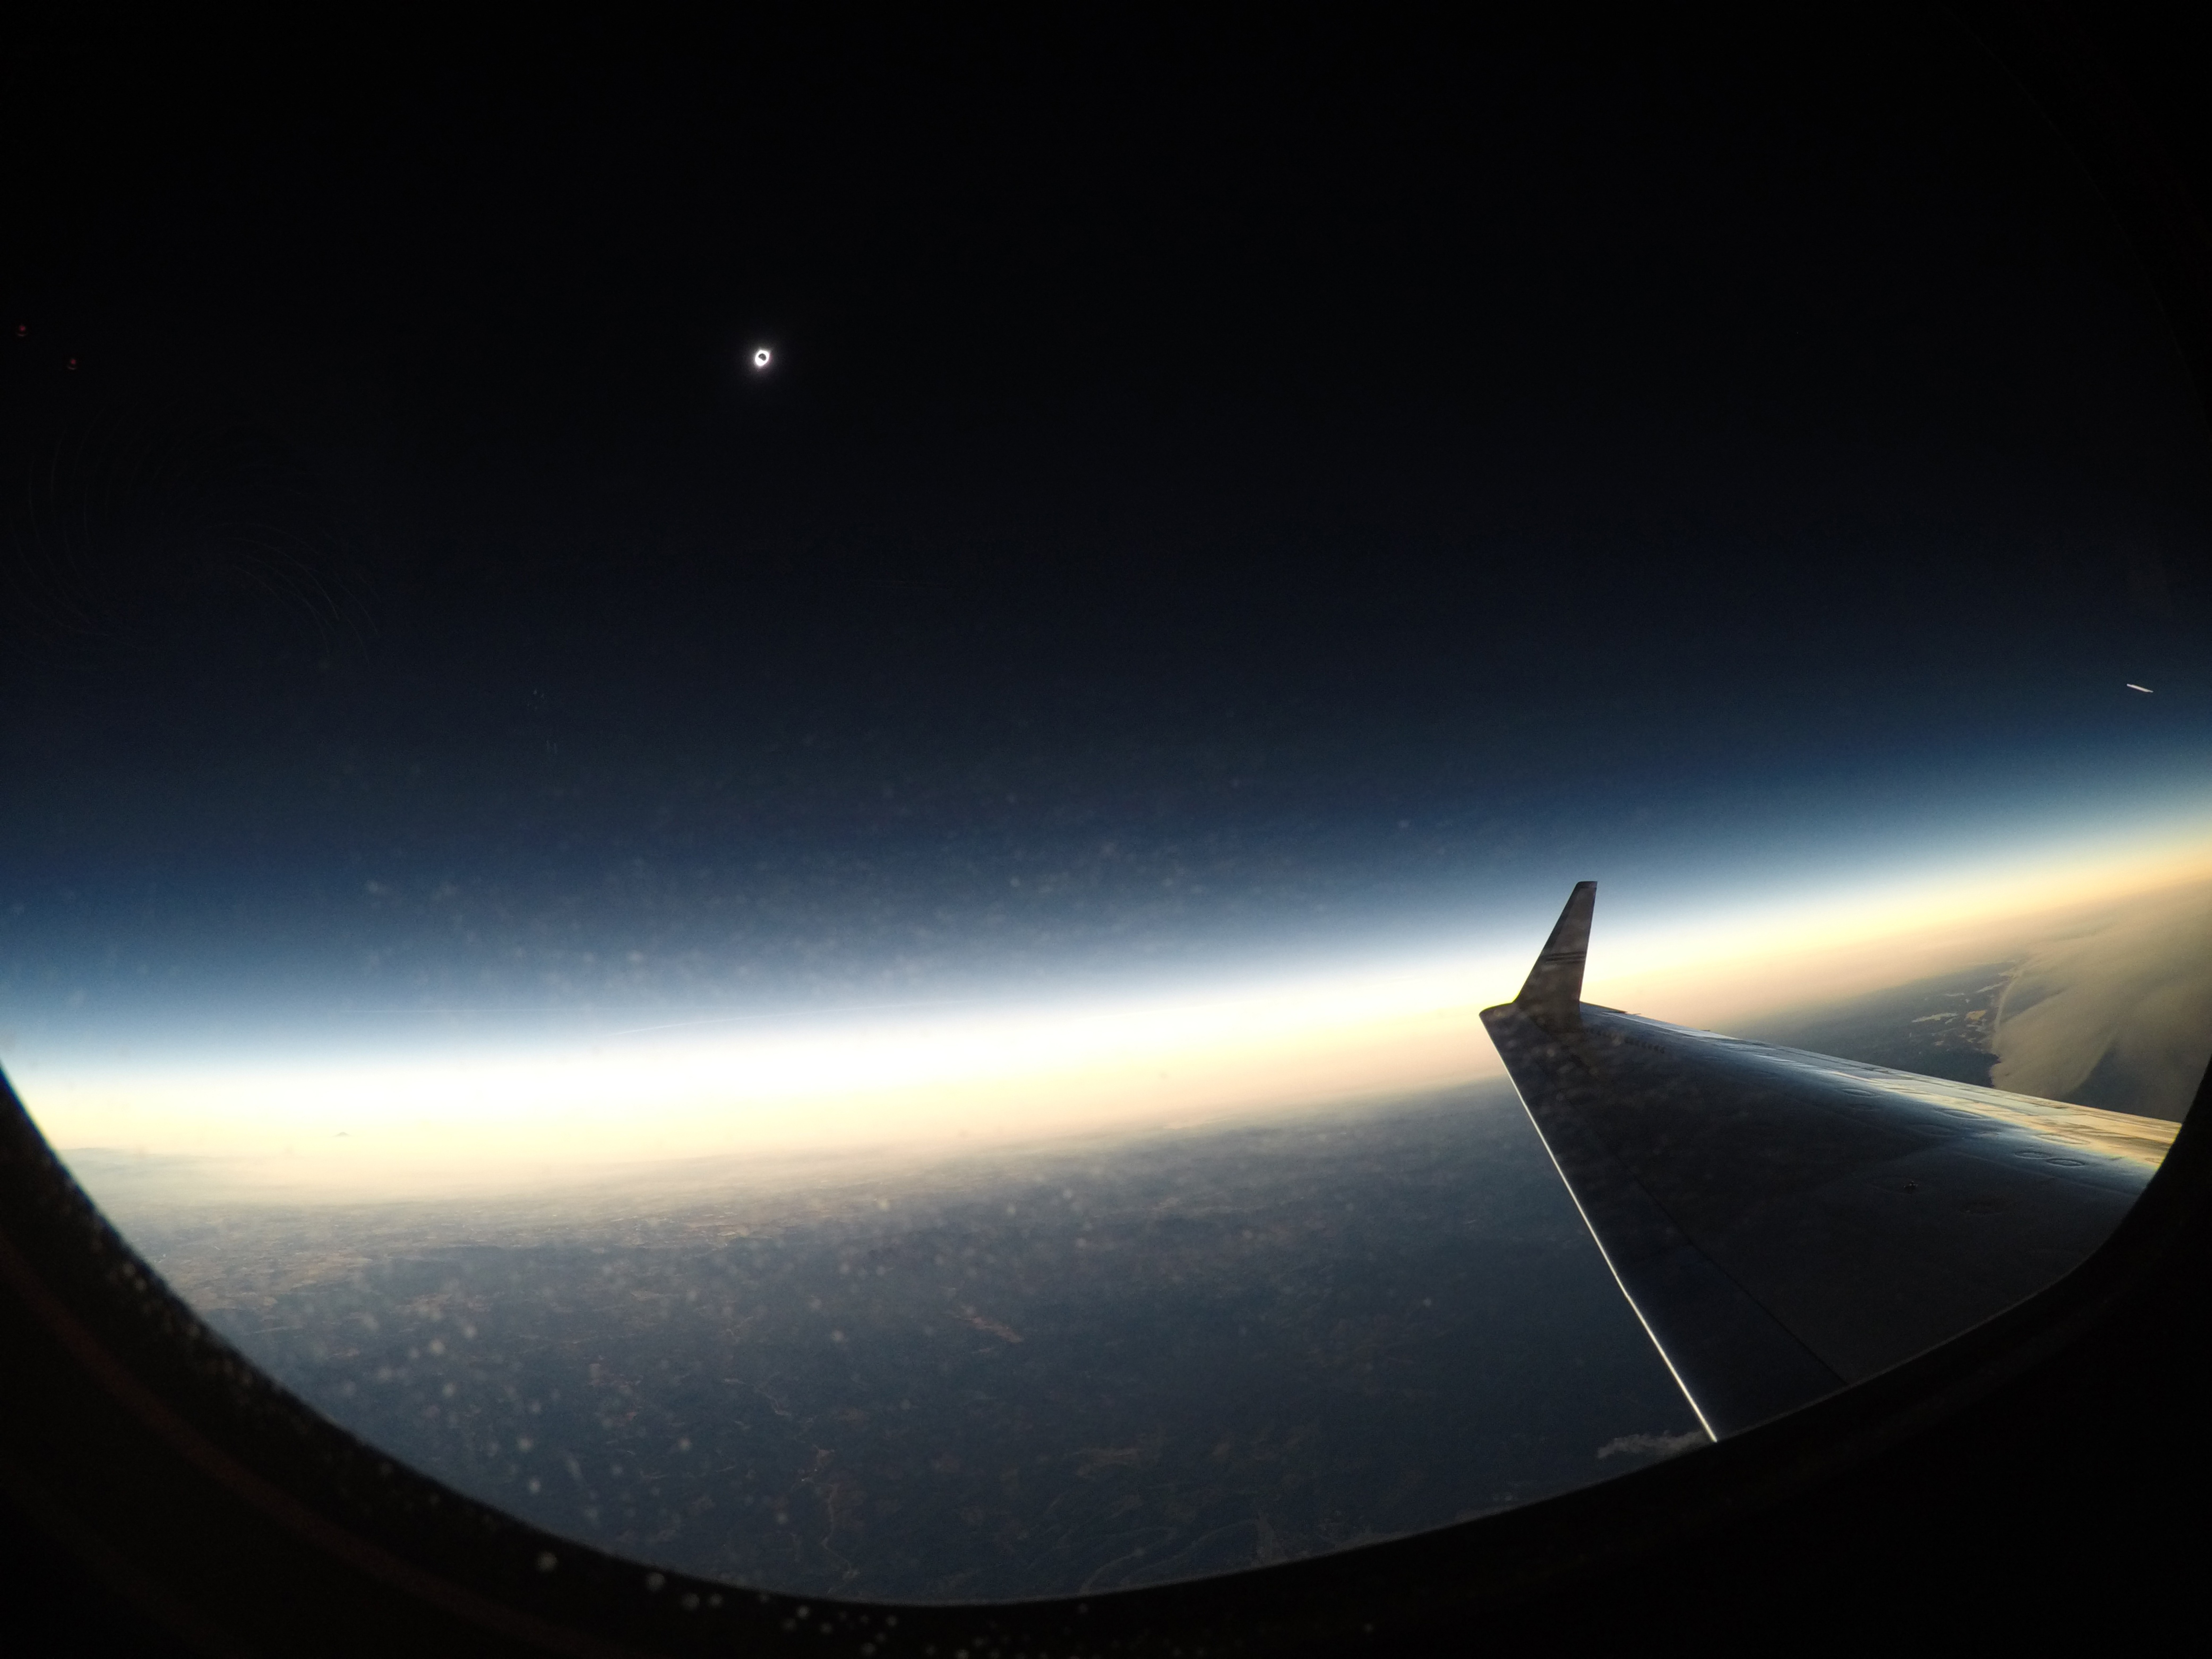 A total solar eclipse is seen on Monday, August 21, 2017 from onboard a NASA Armstrong Flight Research Center’s Gulfstream III 25,000 feet above the Oregon coast. A total solar eclipse swept across a narrow portion of the contiguous United States from Lin (Foto: (NASA/Carla Thomas ))